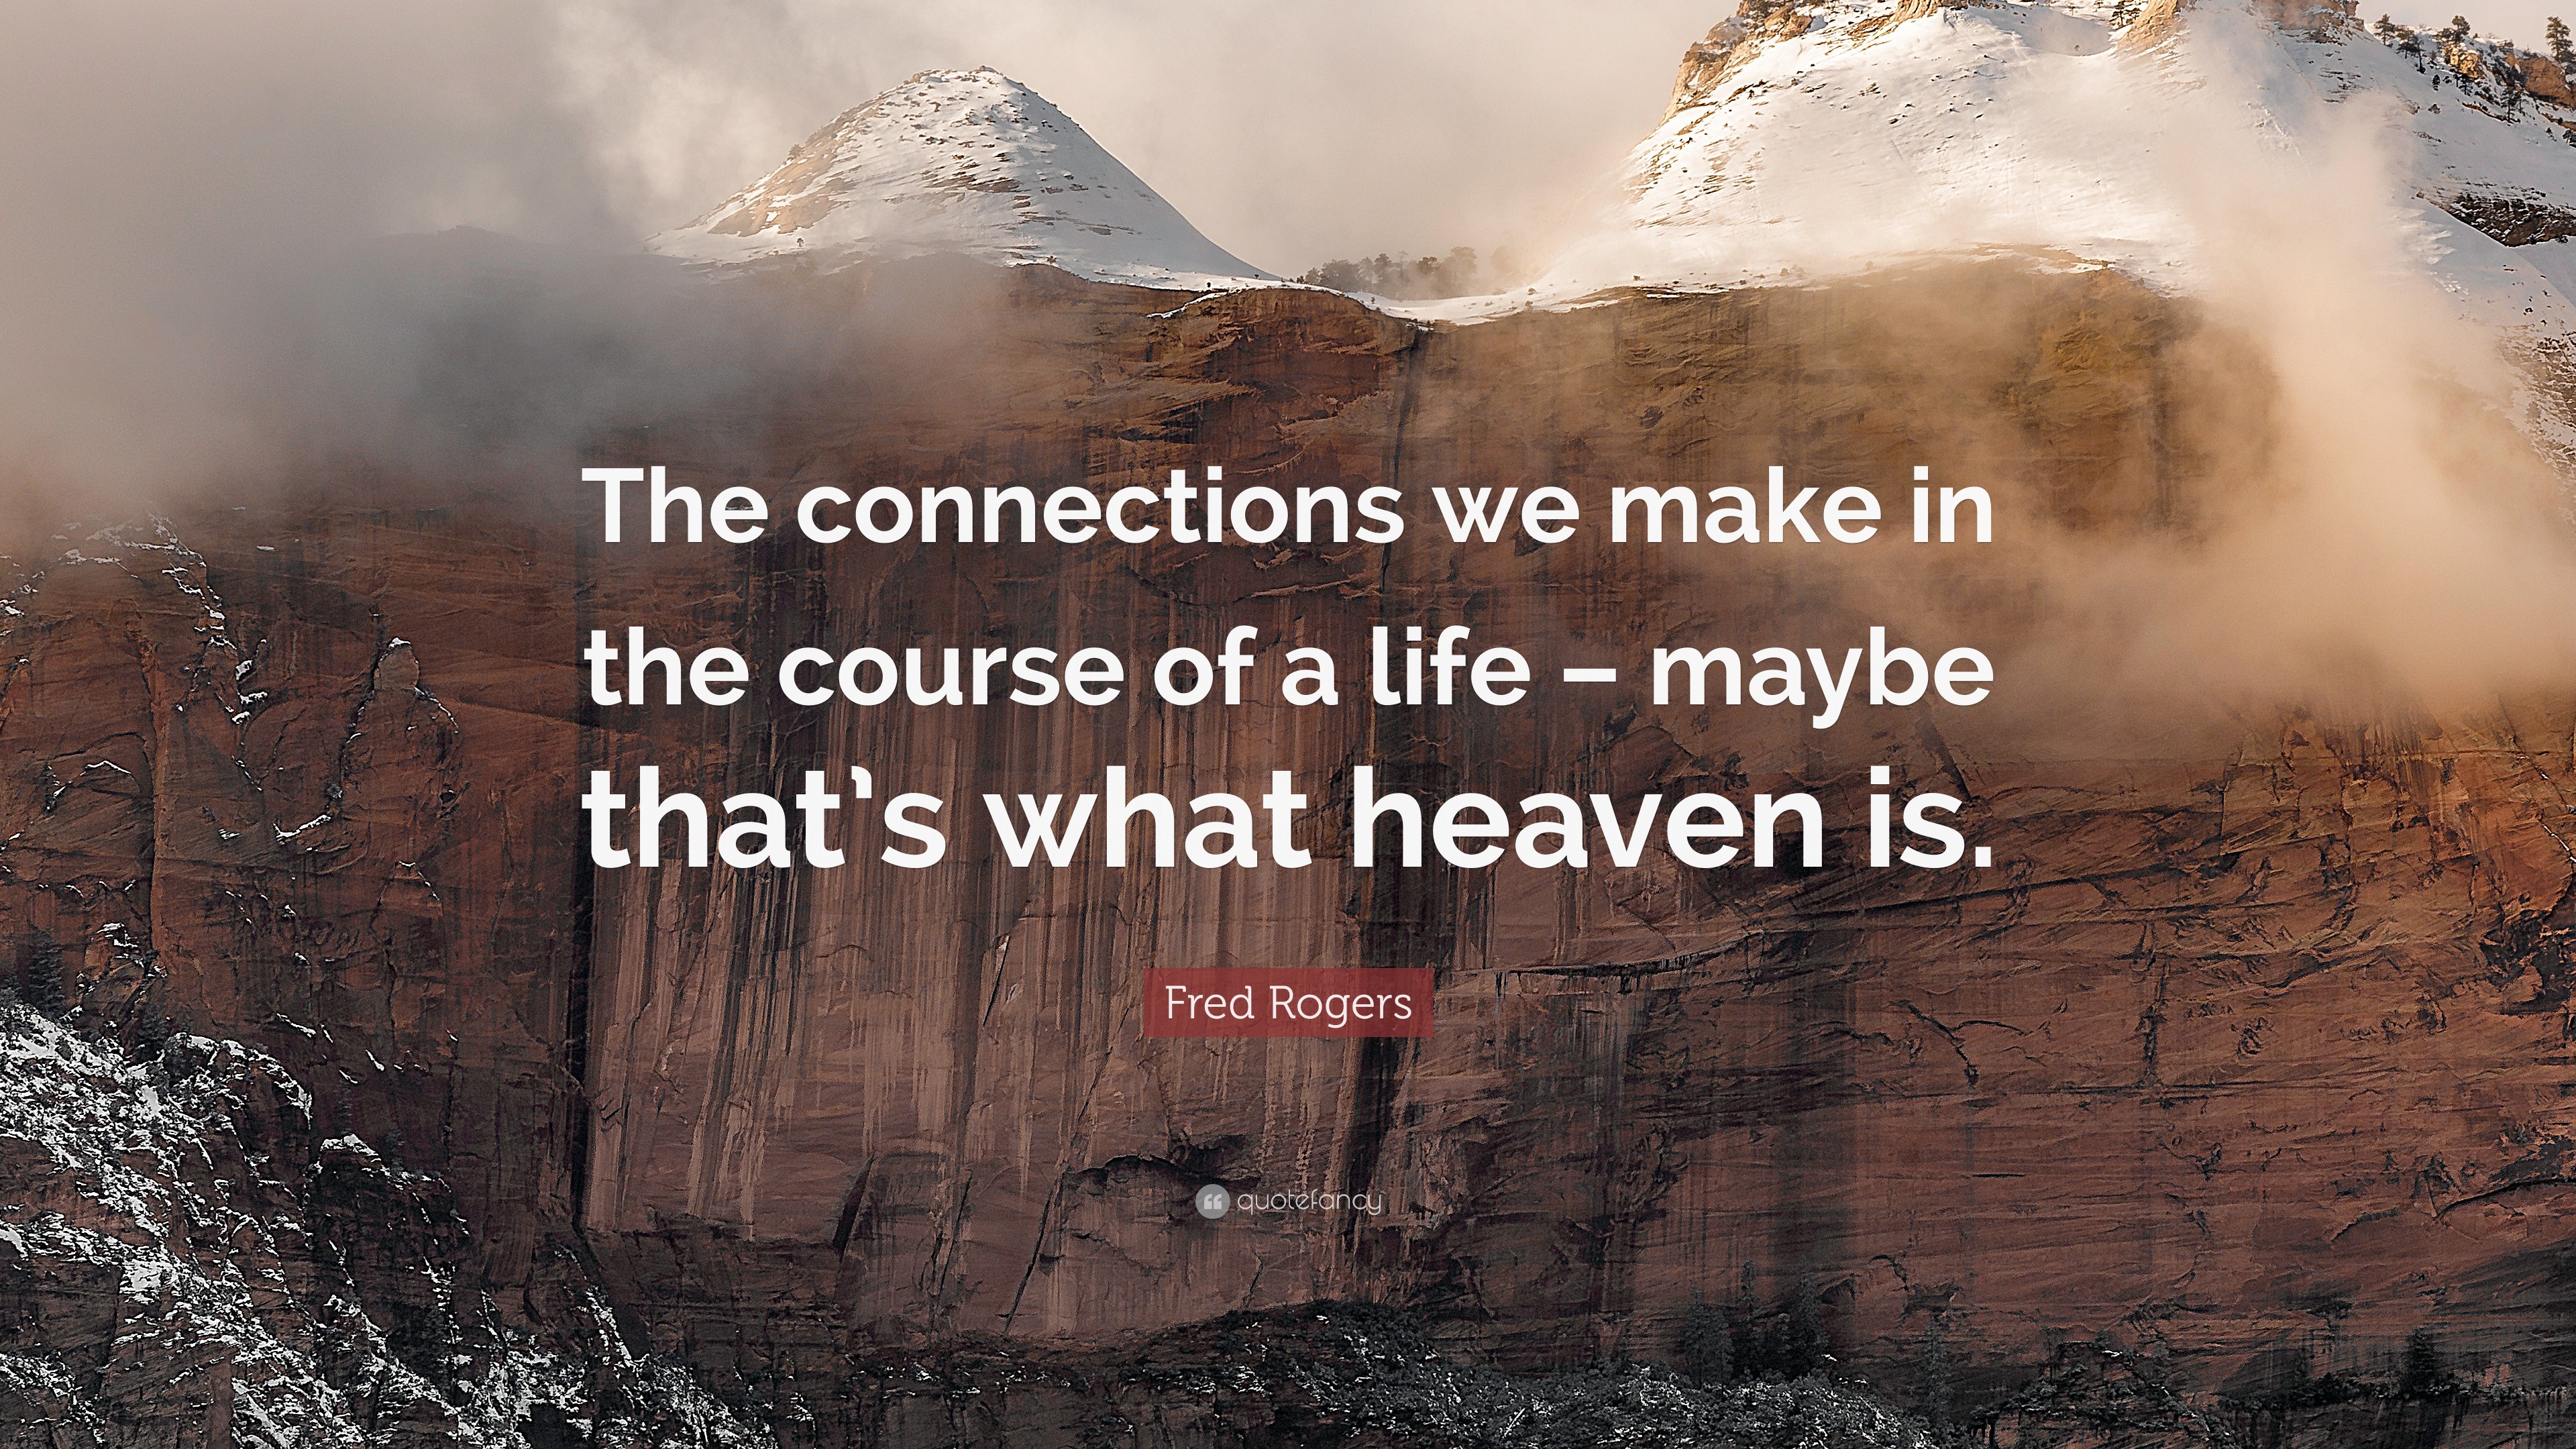 Fred Rogers Quote “The connections we make in the course